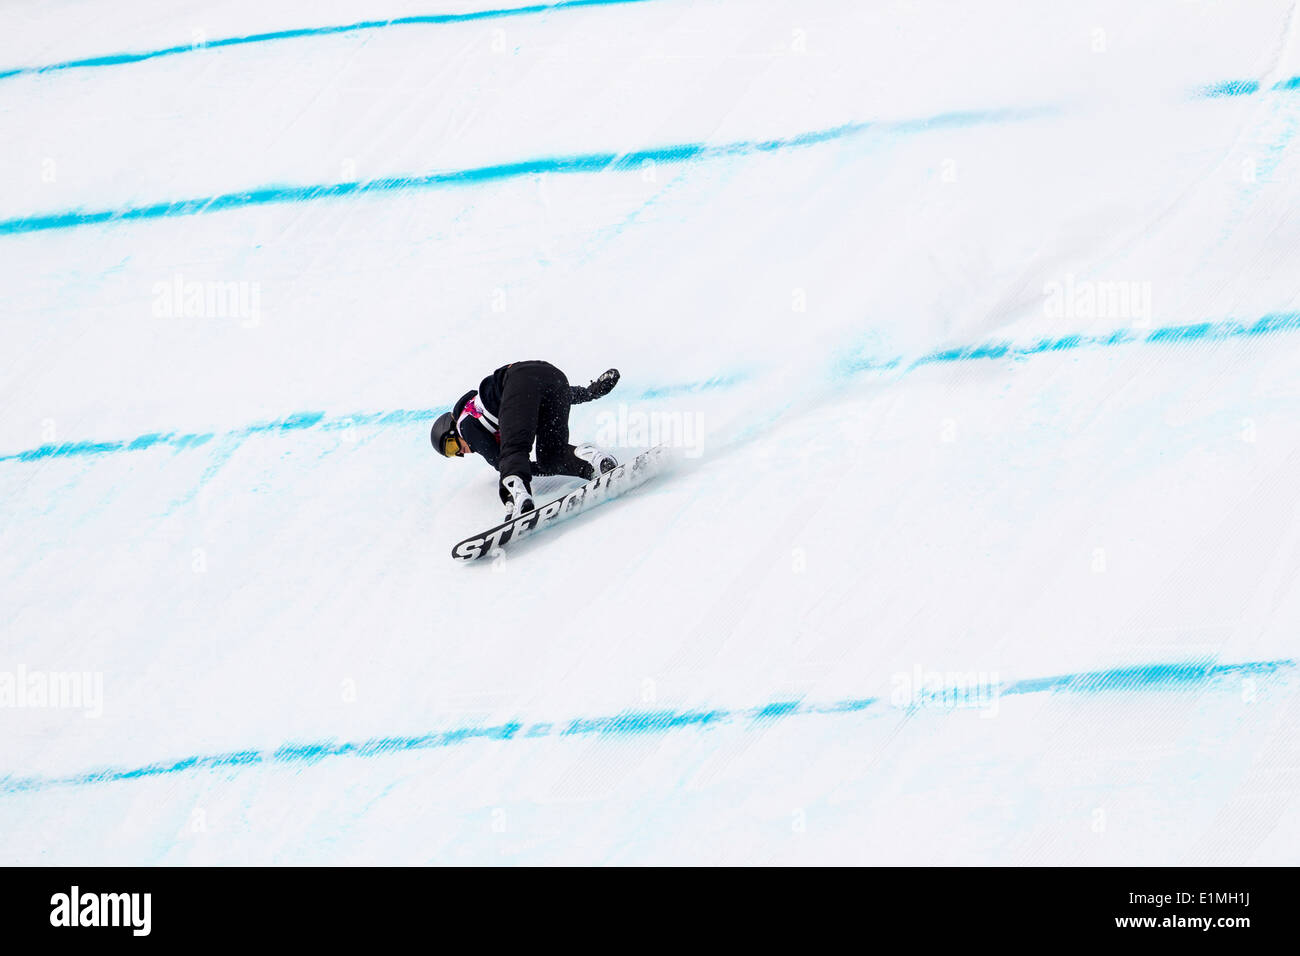 Rebecca Torr (NZL) competing in Ladies's Snowboard Slopestyle at the Olympic Winter Games, Sochi 2014 Stock Photo